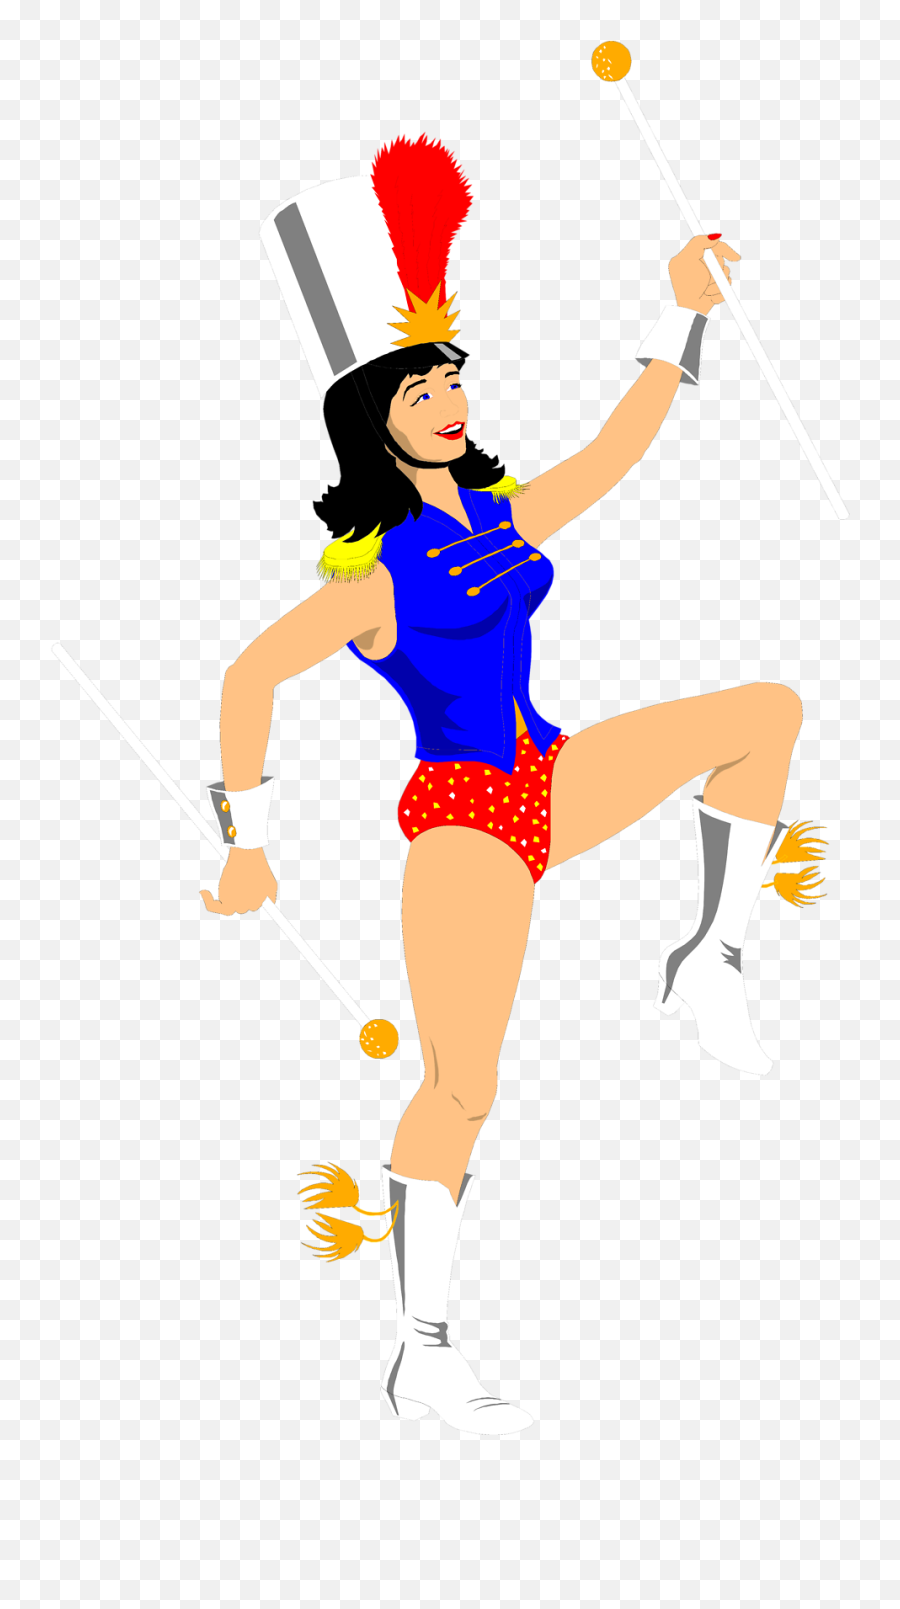 Majorette Free Stock Photo Illustration Of A Band Majorette - For Cheerleading Emoji,Why Clipart